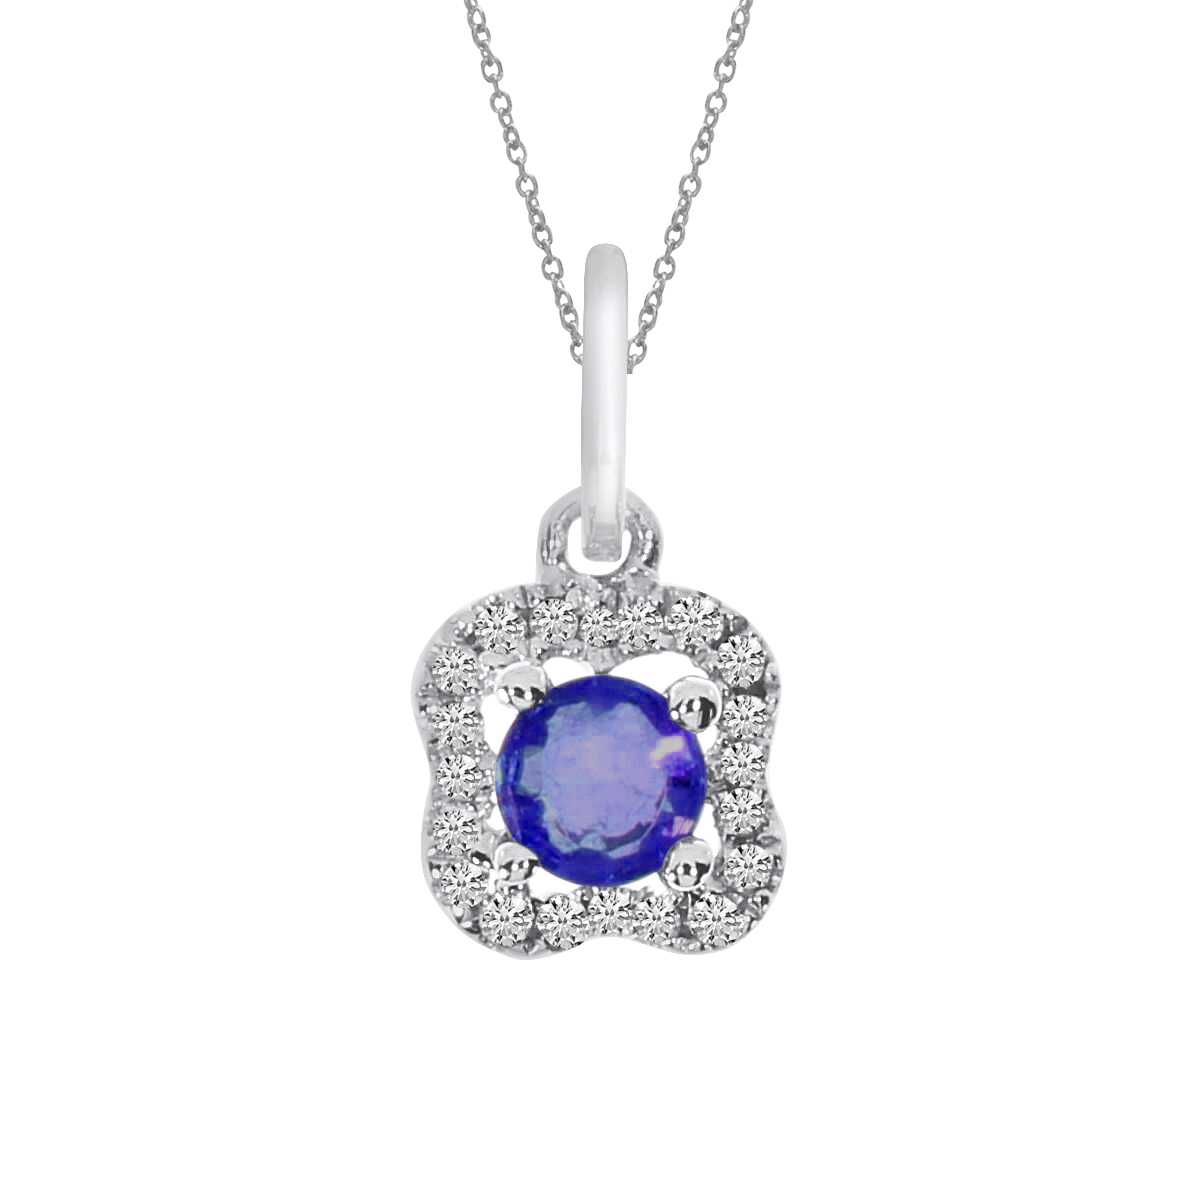 JCX2617: A charming pendant in 14k white gold with a beautiful 3.5 mm round sapphire and .05 ct diamonds.